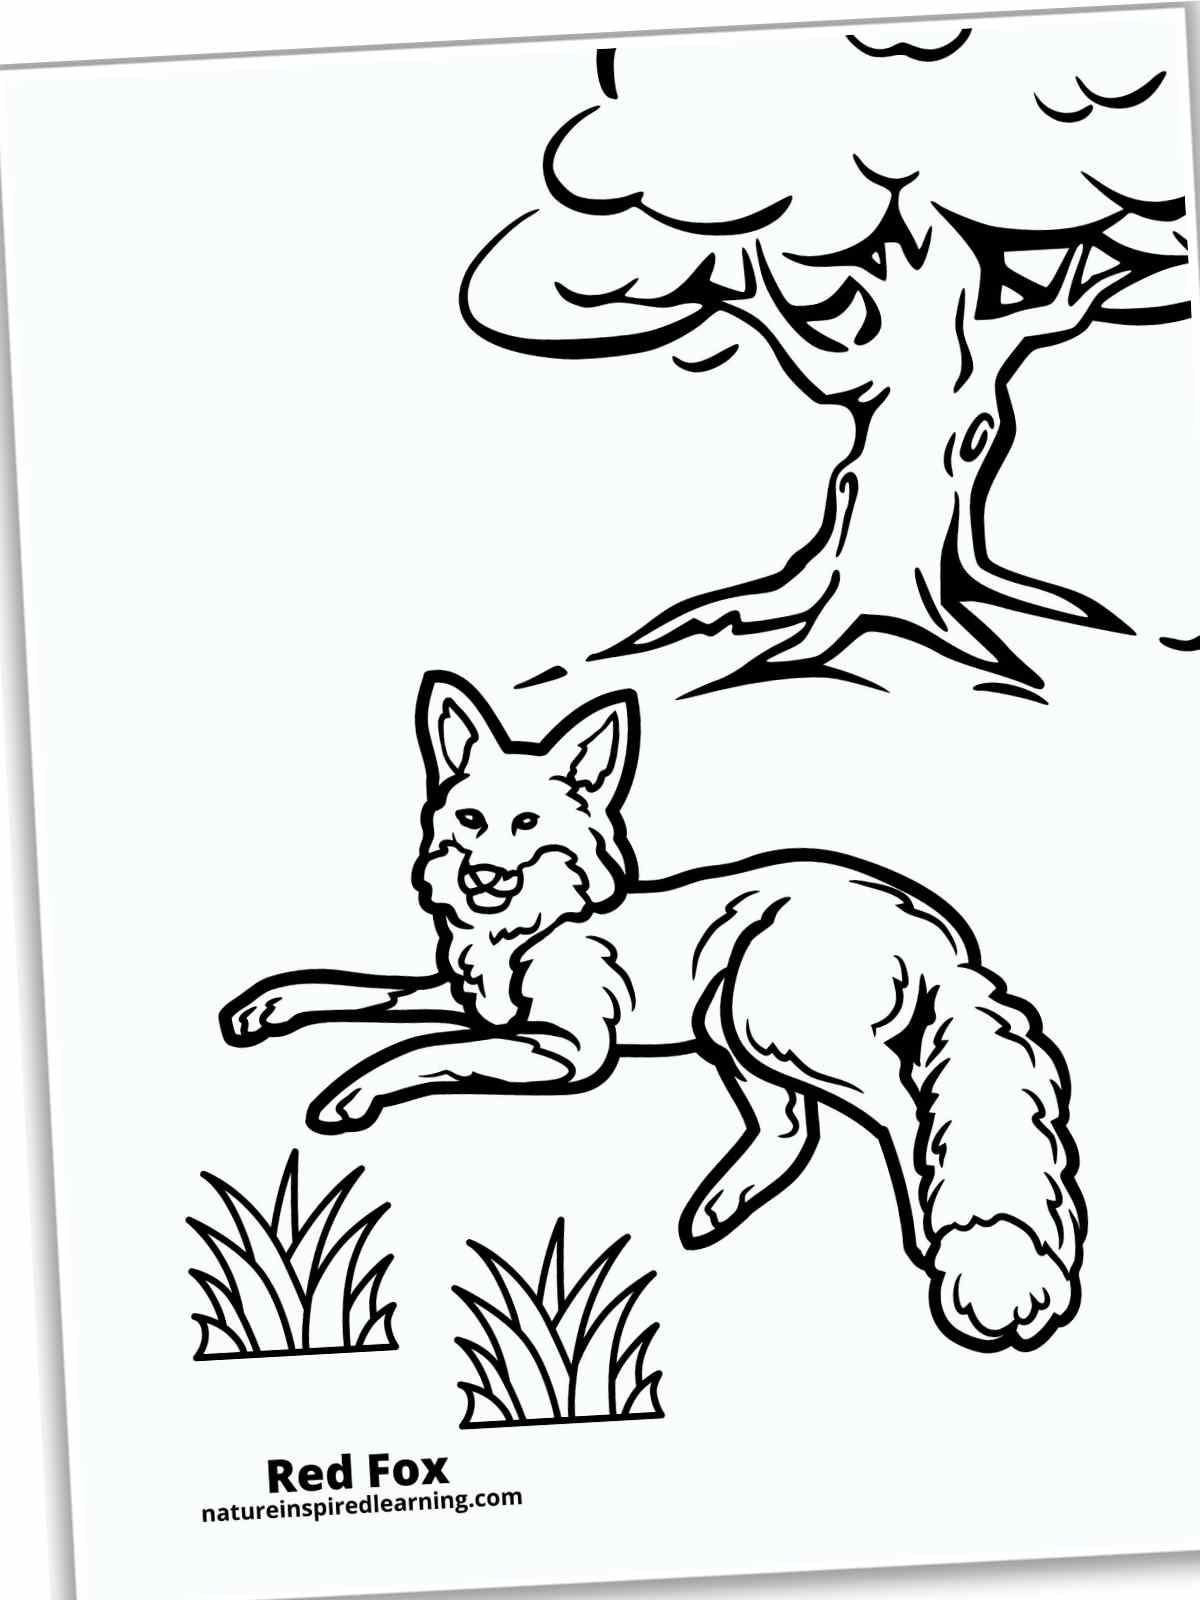 Black and white printable of a Fox laying in the grass with a tree in the background. Slanted on a white background with a drop shadow.